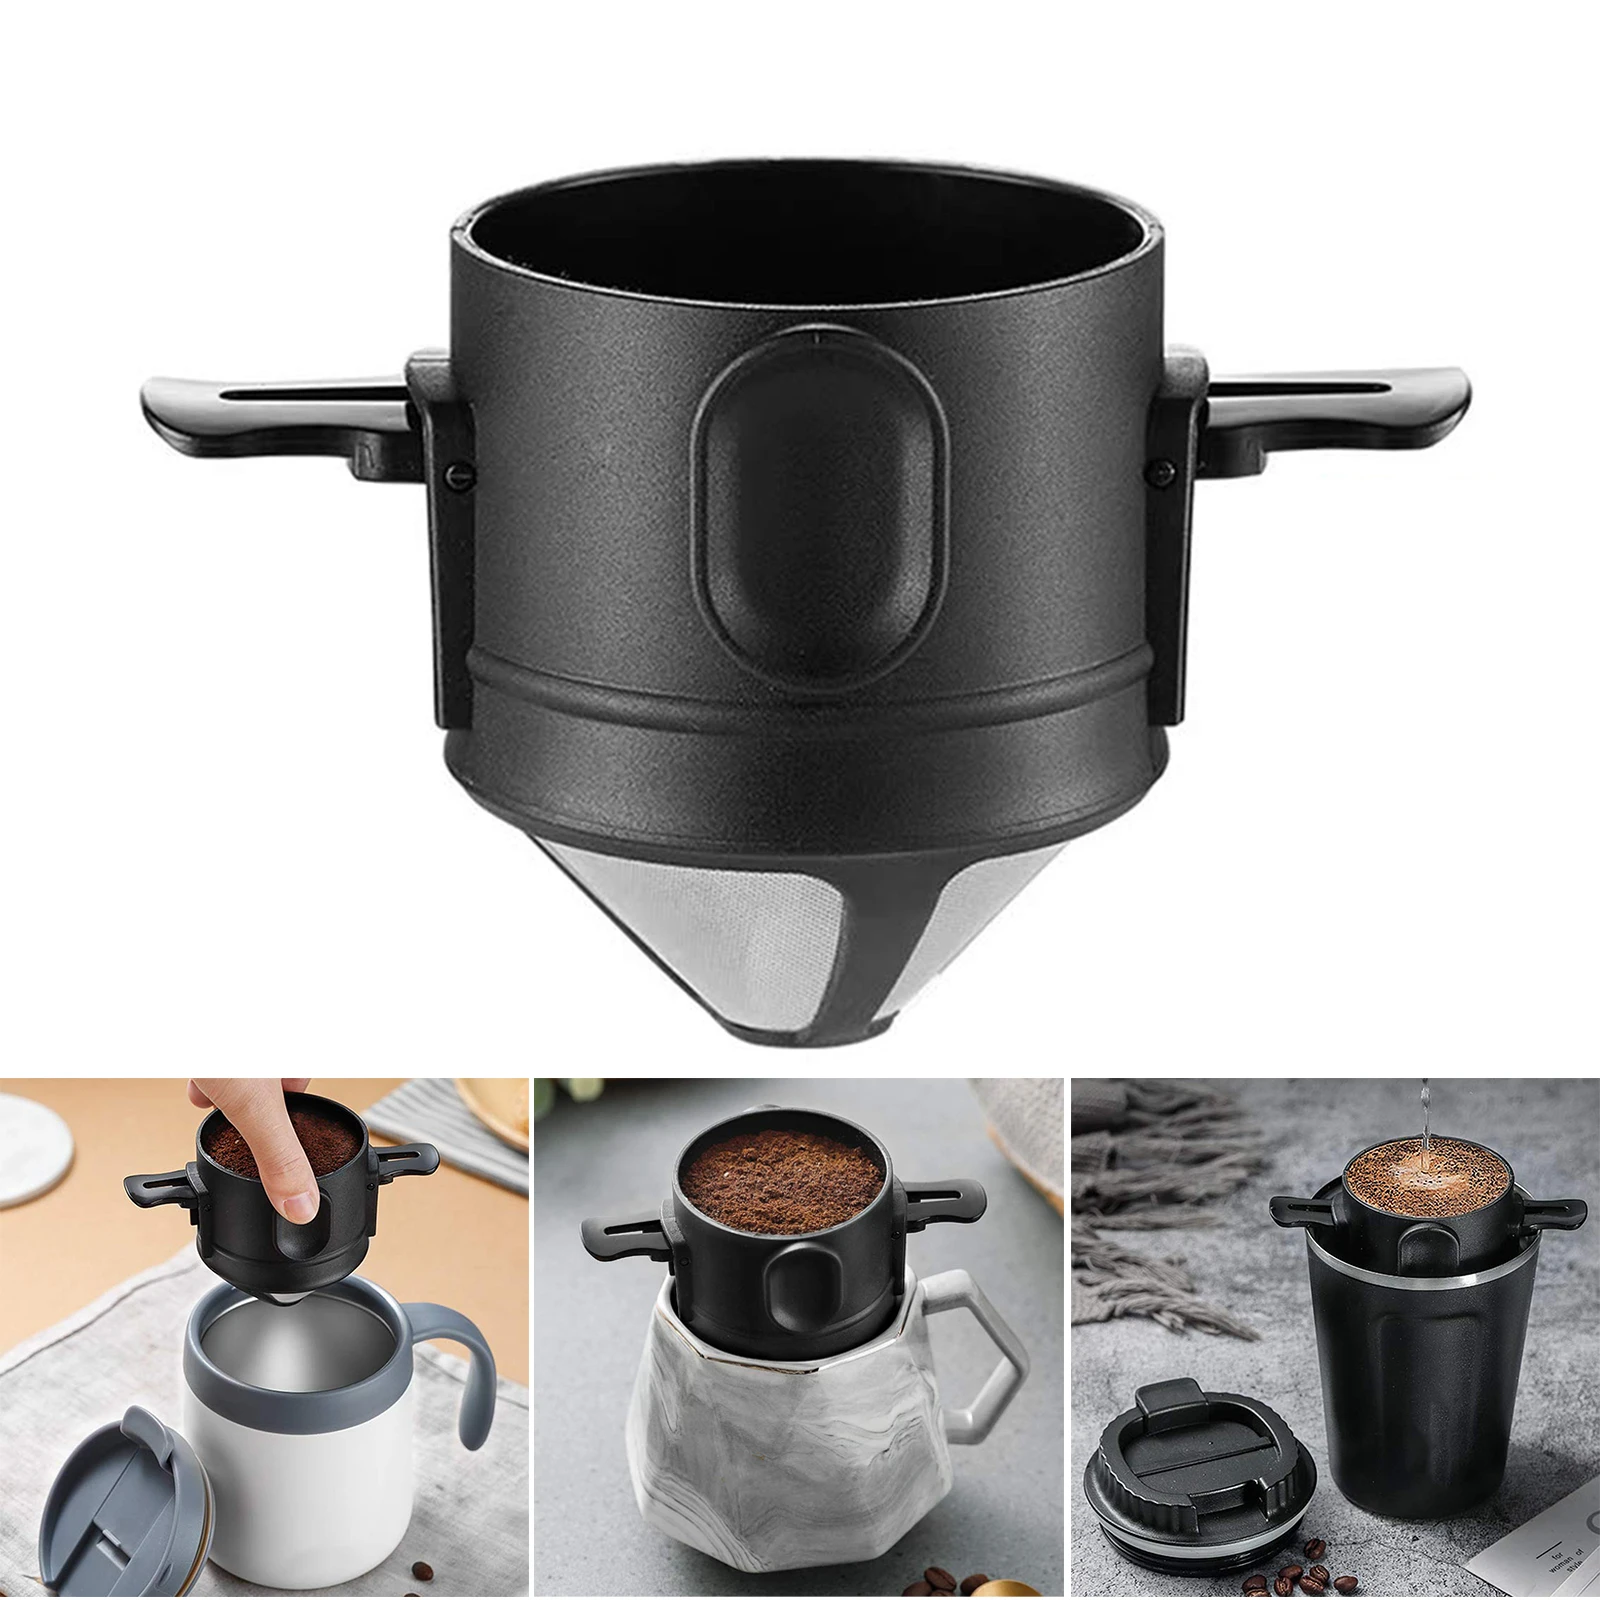 Taper Hand Brew Coffee Filter Foldable Stainless Steel Filter Mesh Reusable  Portable Filter Coffee Maker for Machine GQ|Coffee Filters| - AliExpress